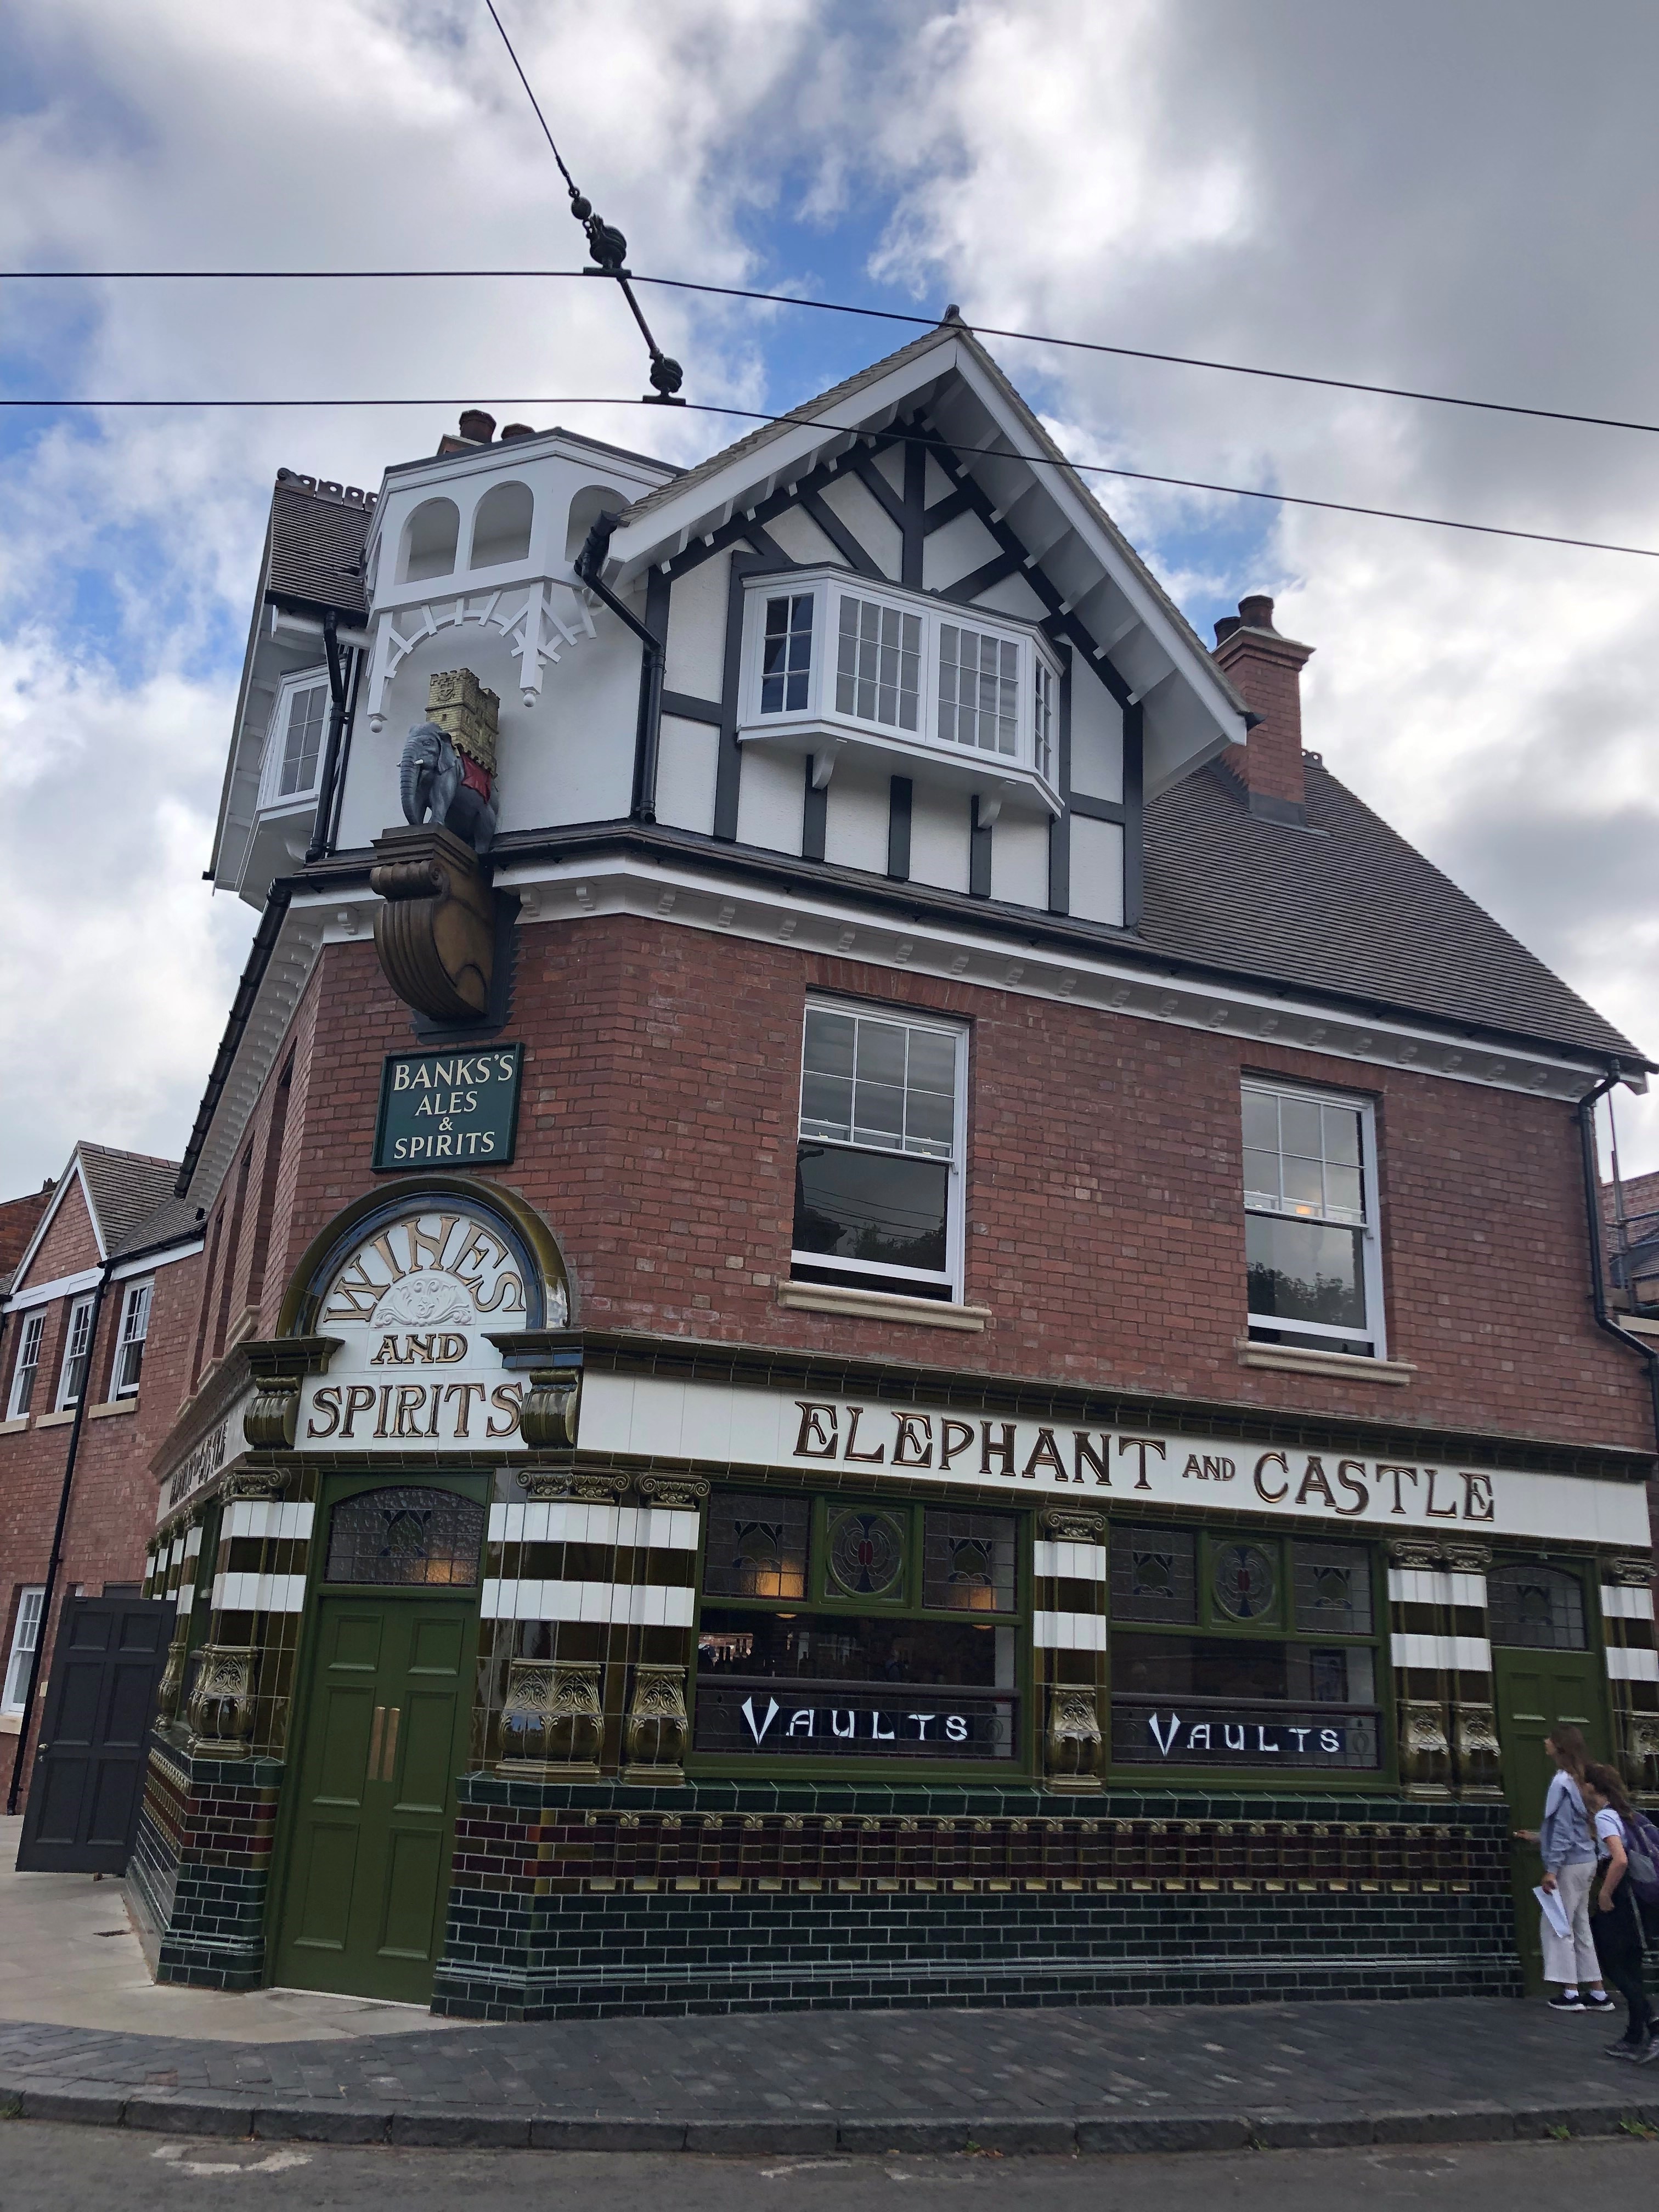 The reconstructed Elephant and Castle pub which has been has been moved brick by brick from Wolverhampton to the museum